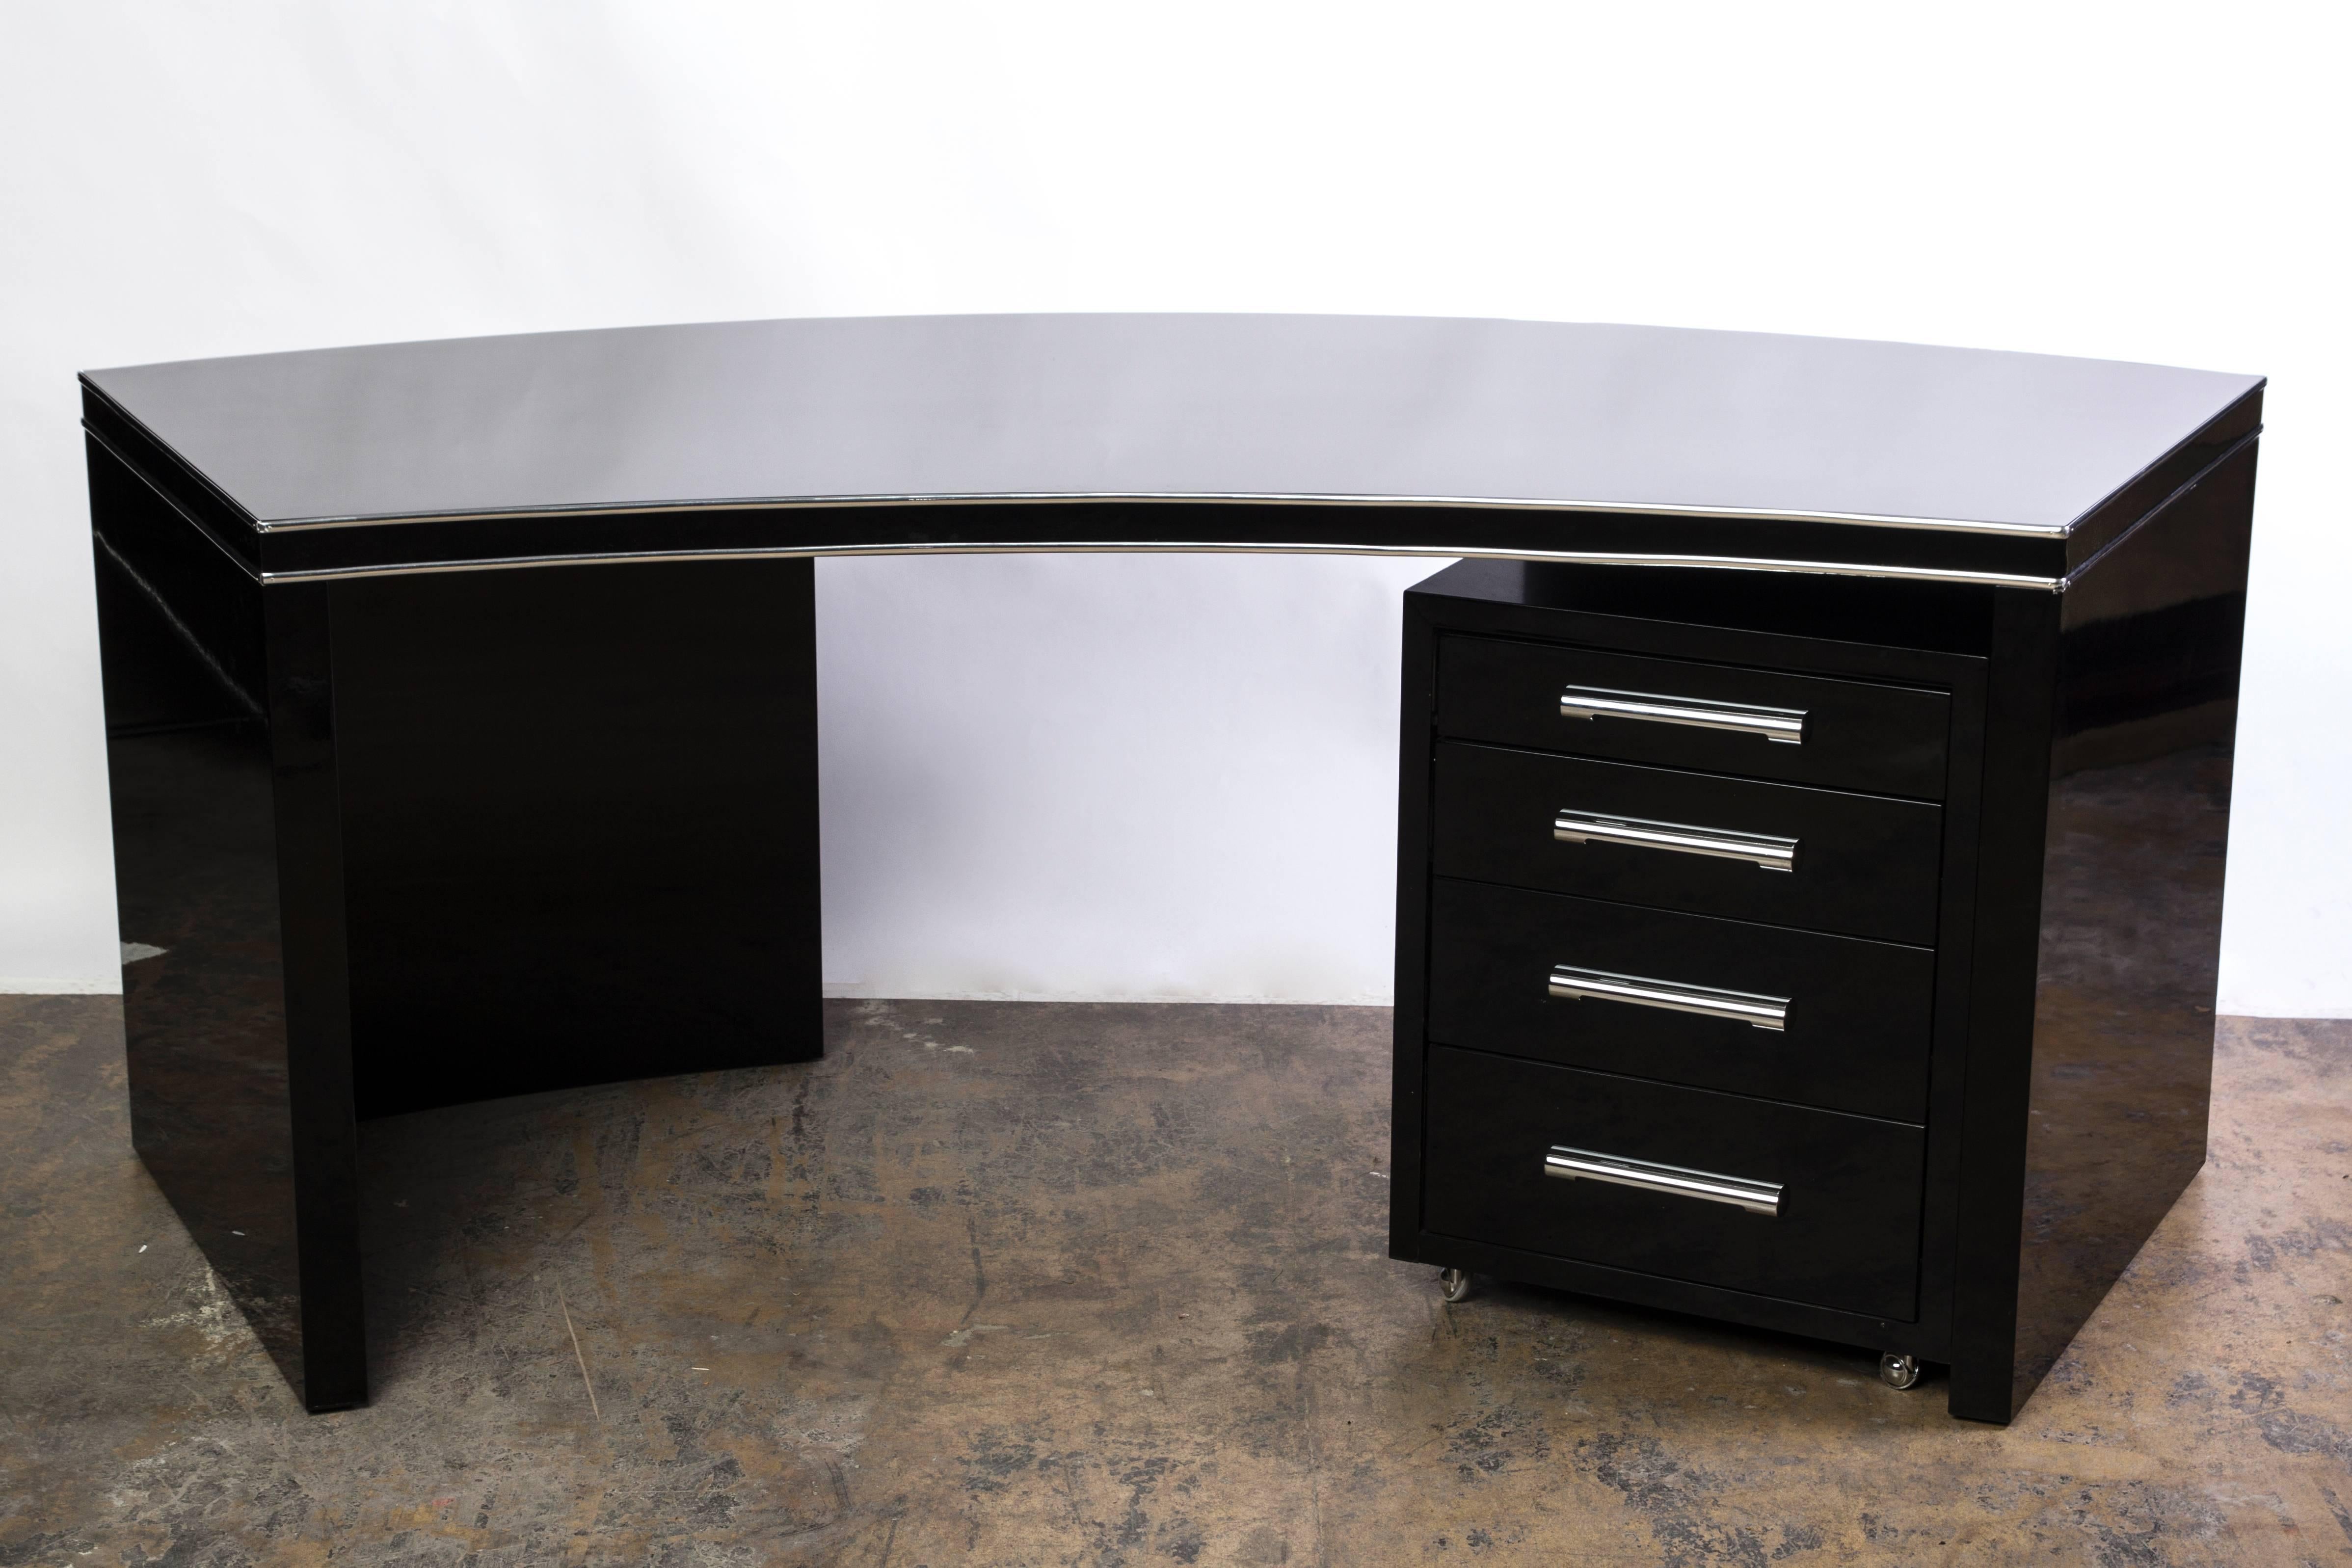 This wonderful Art Deco desk features a curved design with chrome-line embellishments and finished in a high gloss black lacquer and chrome finishes. The pieces comes accompanied by a filing cabinet with four (4) drawers.

